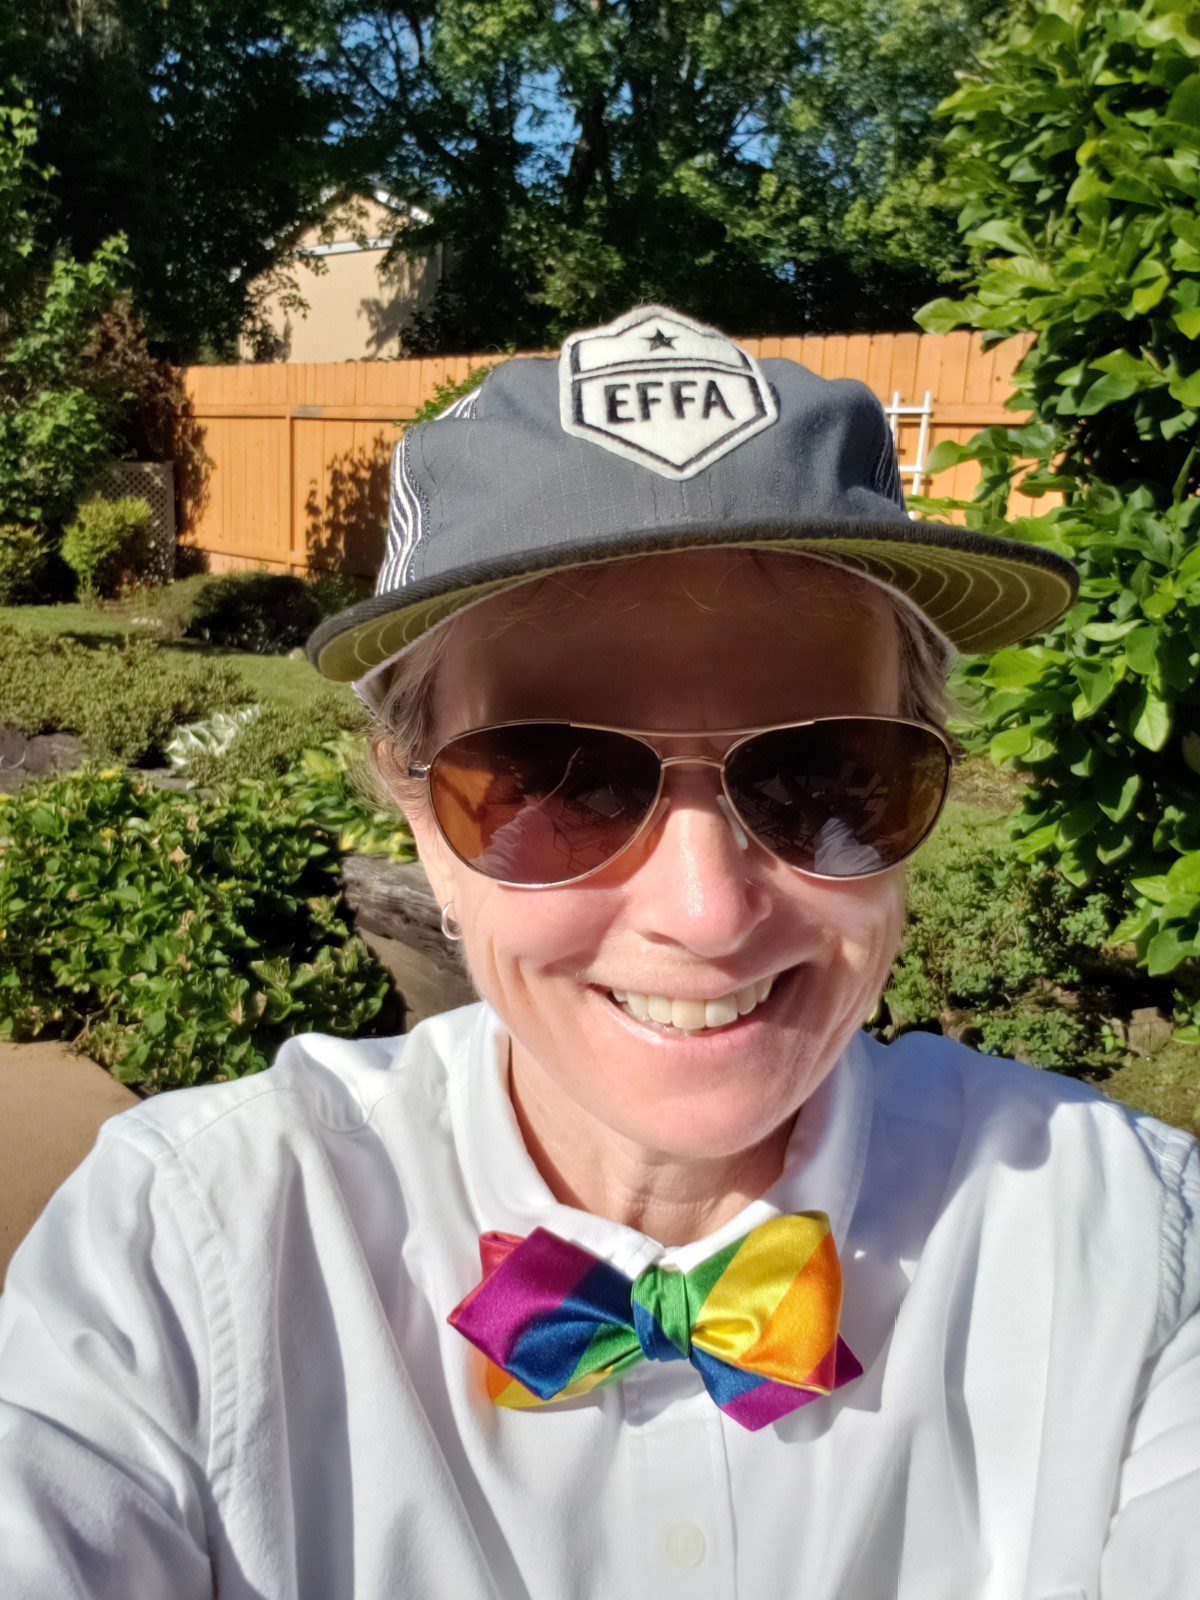 Photo of Holly Krejci, who is a Talent Management Partner with the Seattle Department of Transportation's People, Culture and Logistics Group, with the City of Seattle. Holly smiles at the camera on a sunny day outside.